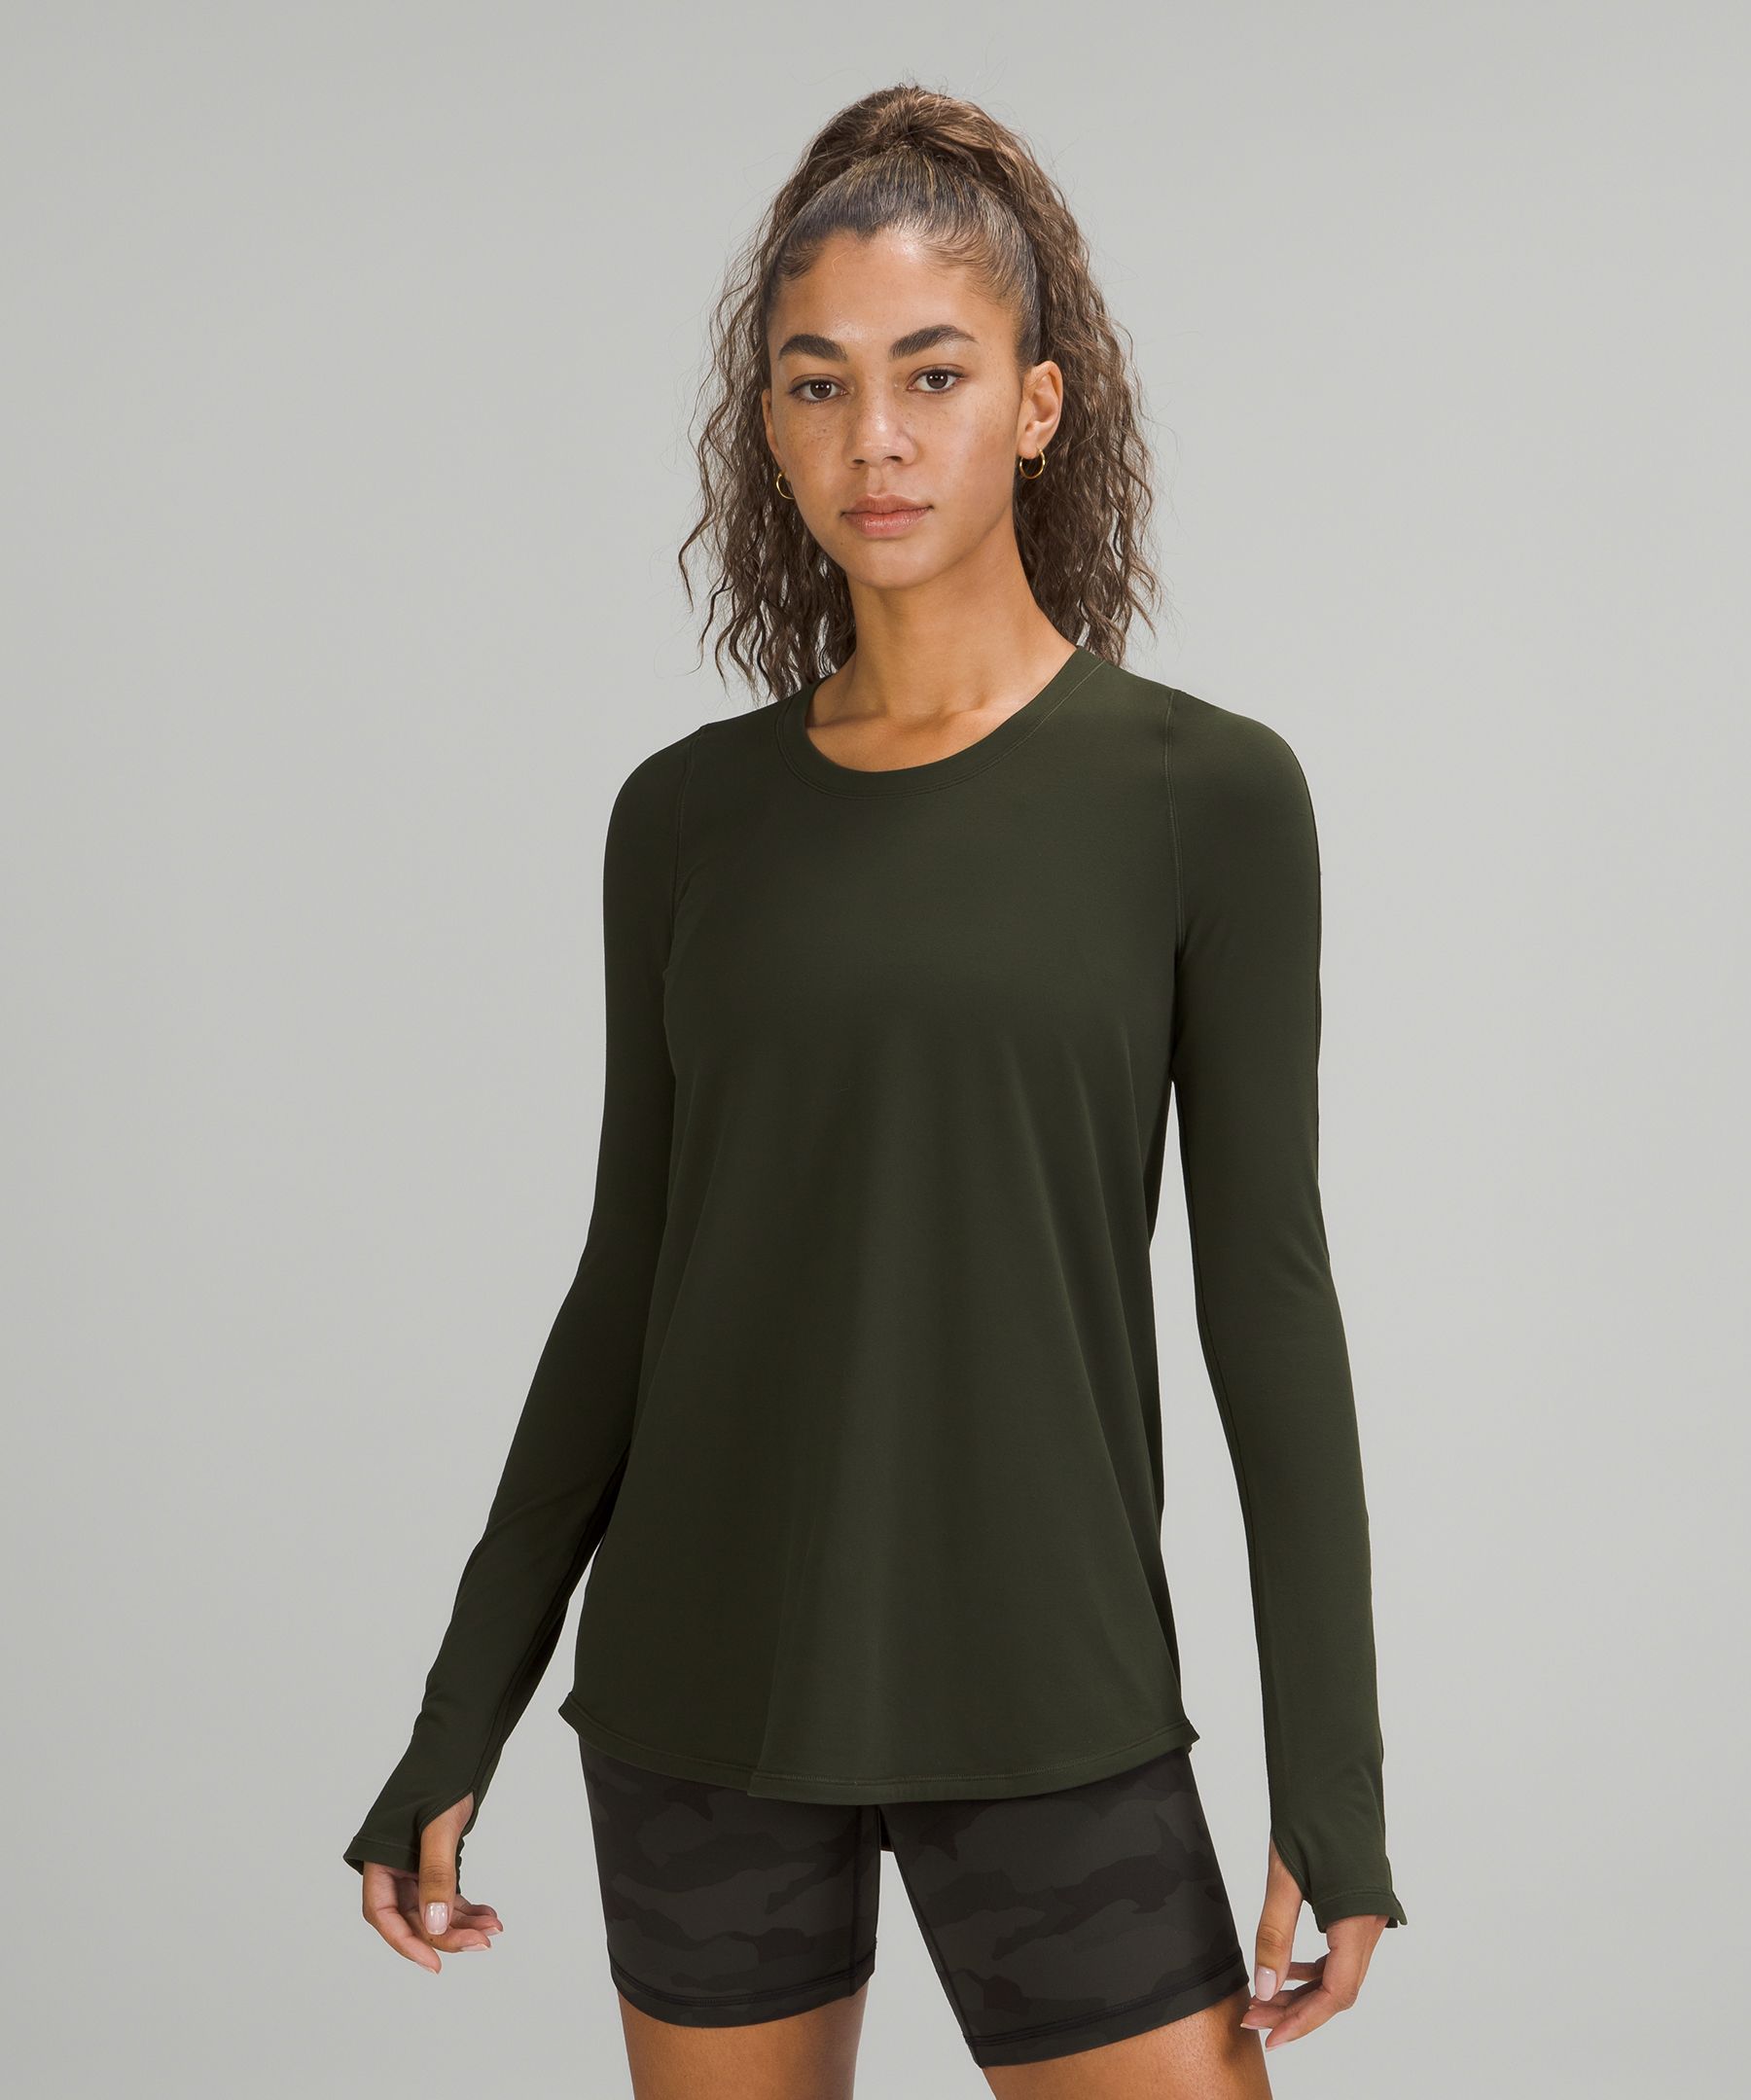 Tuck and Flow Long Sleeve